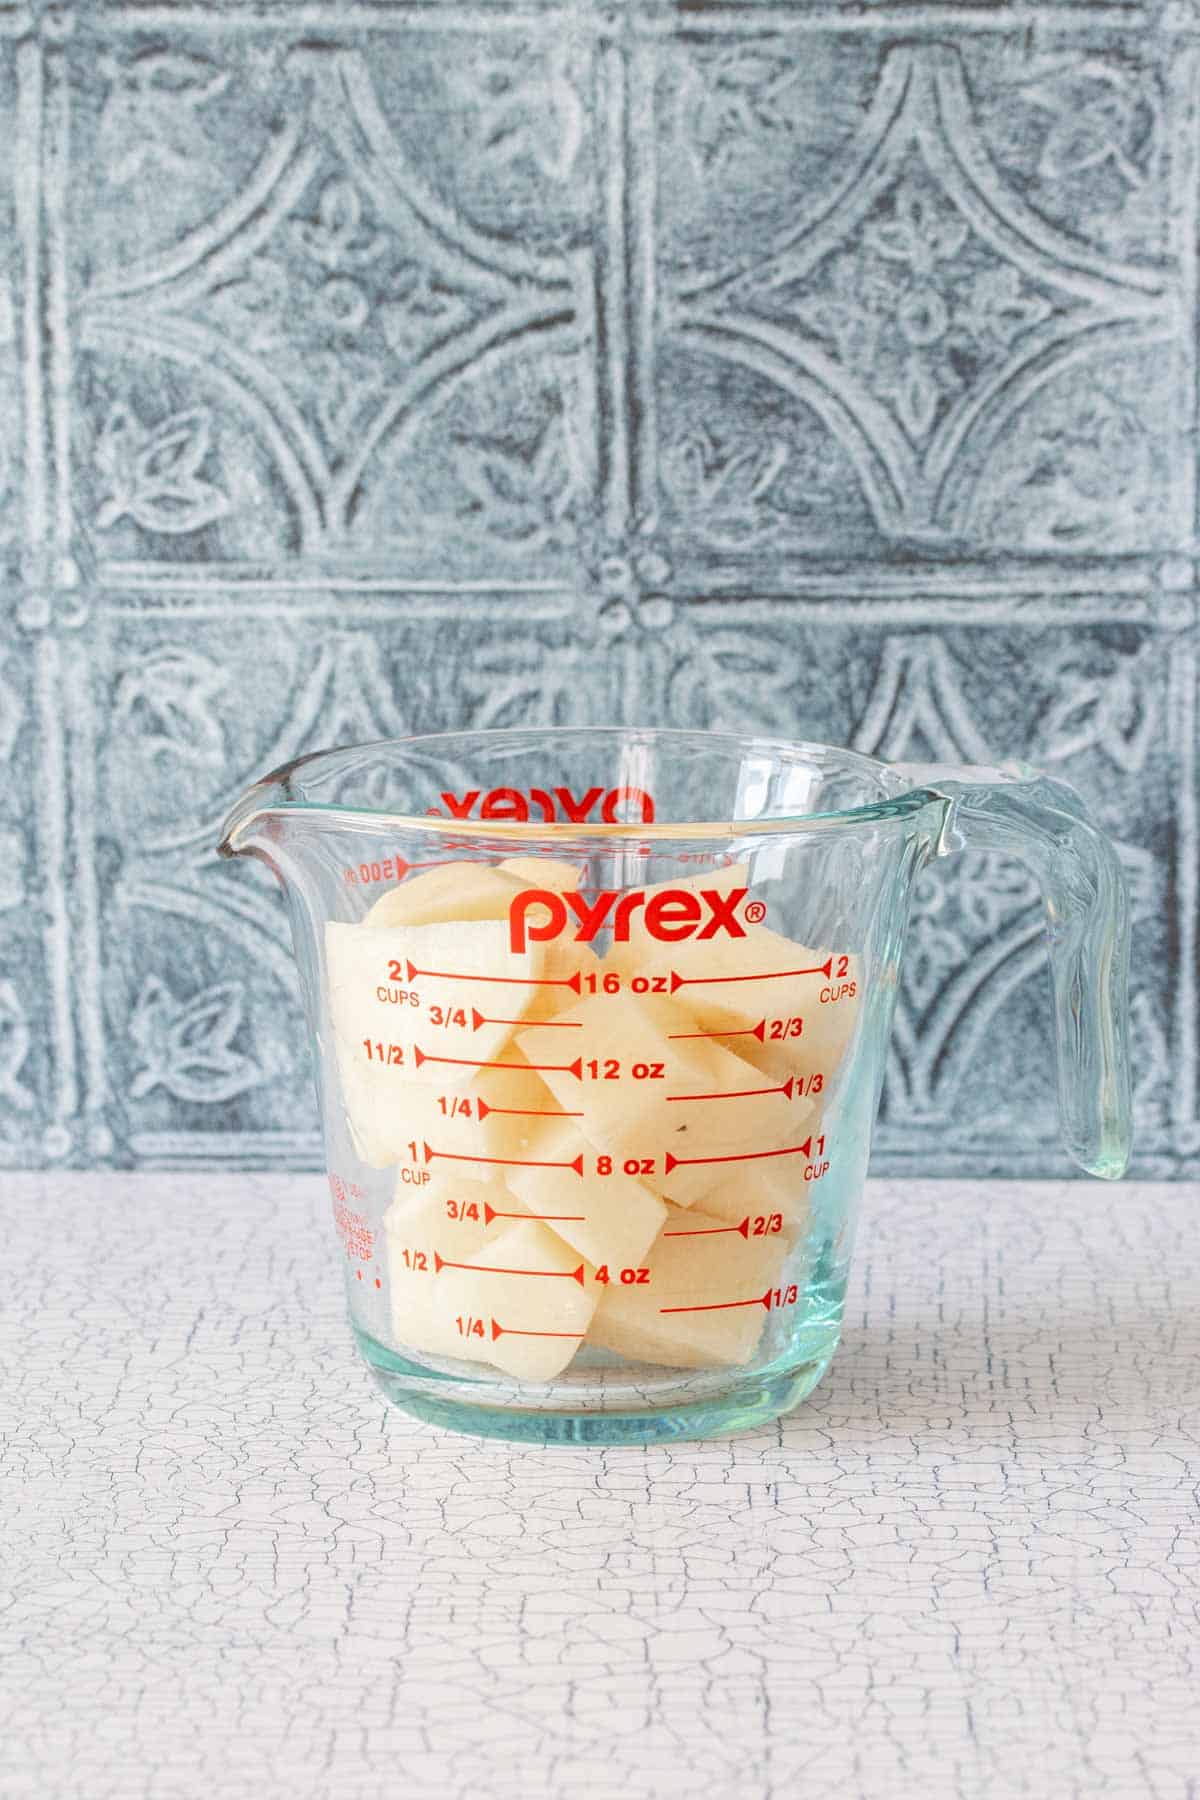 A glass pyrex measuring cup with peeled cut potatoes in it on a white counter in front of blue tile